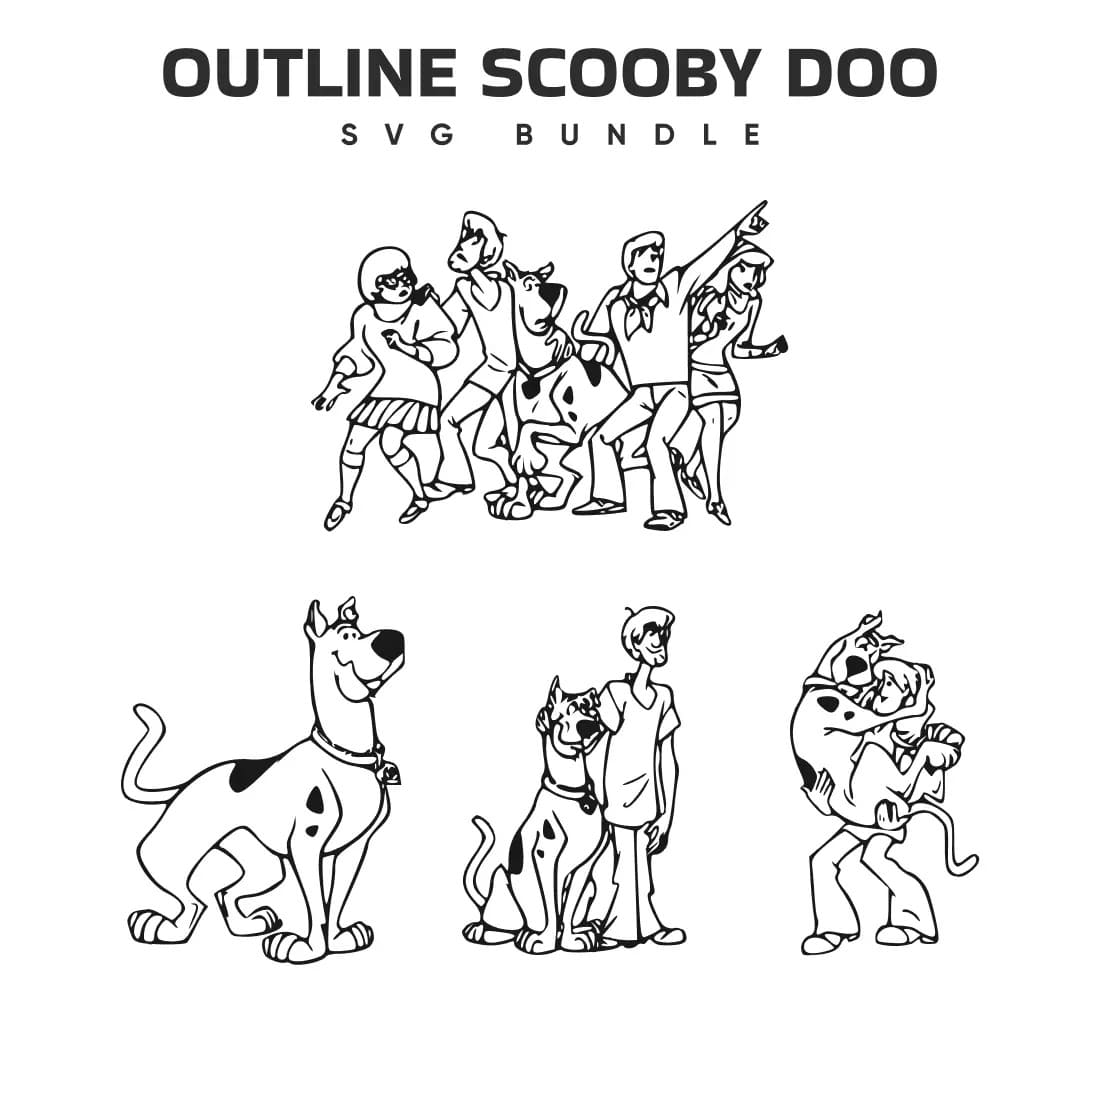 Outline Scooby Doo SVG Bundle Preview.